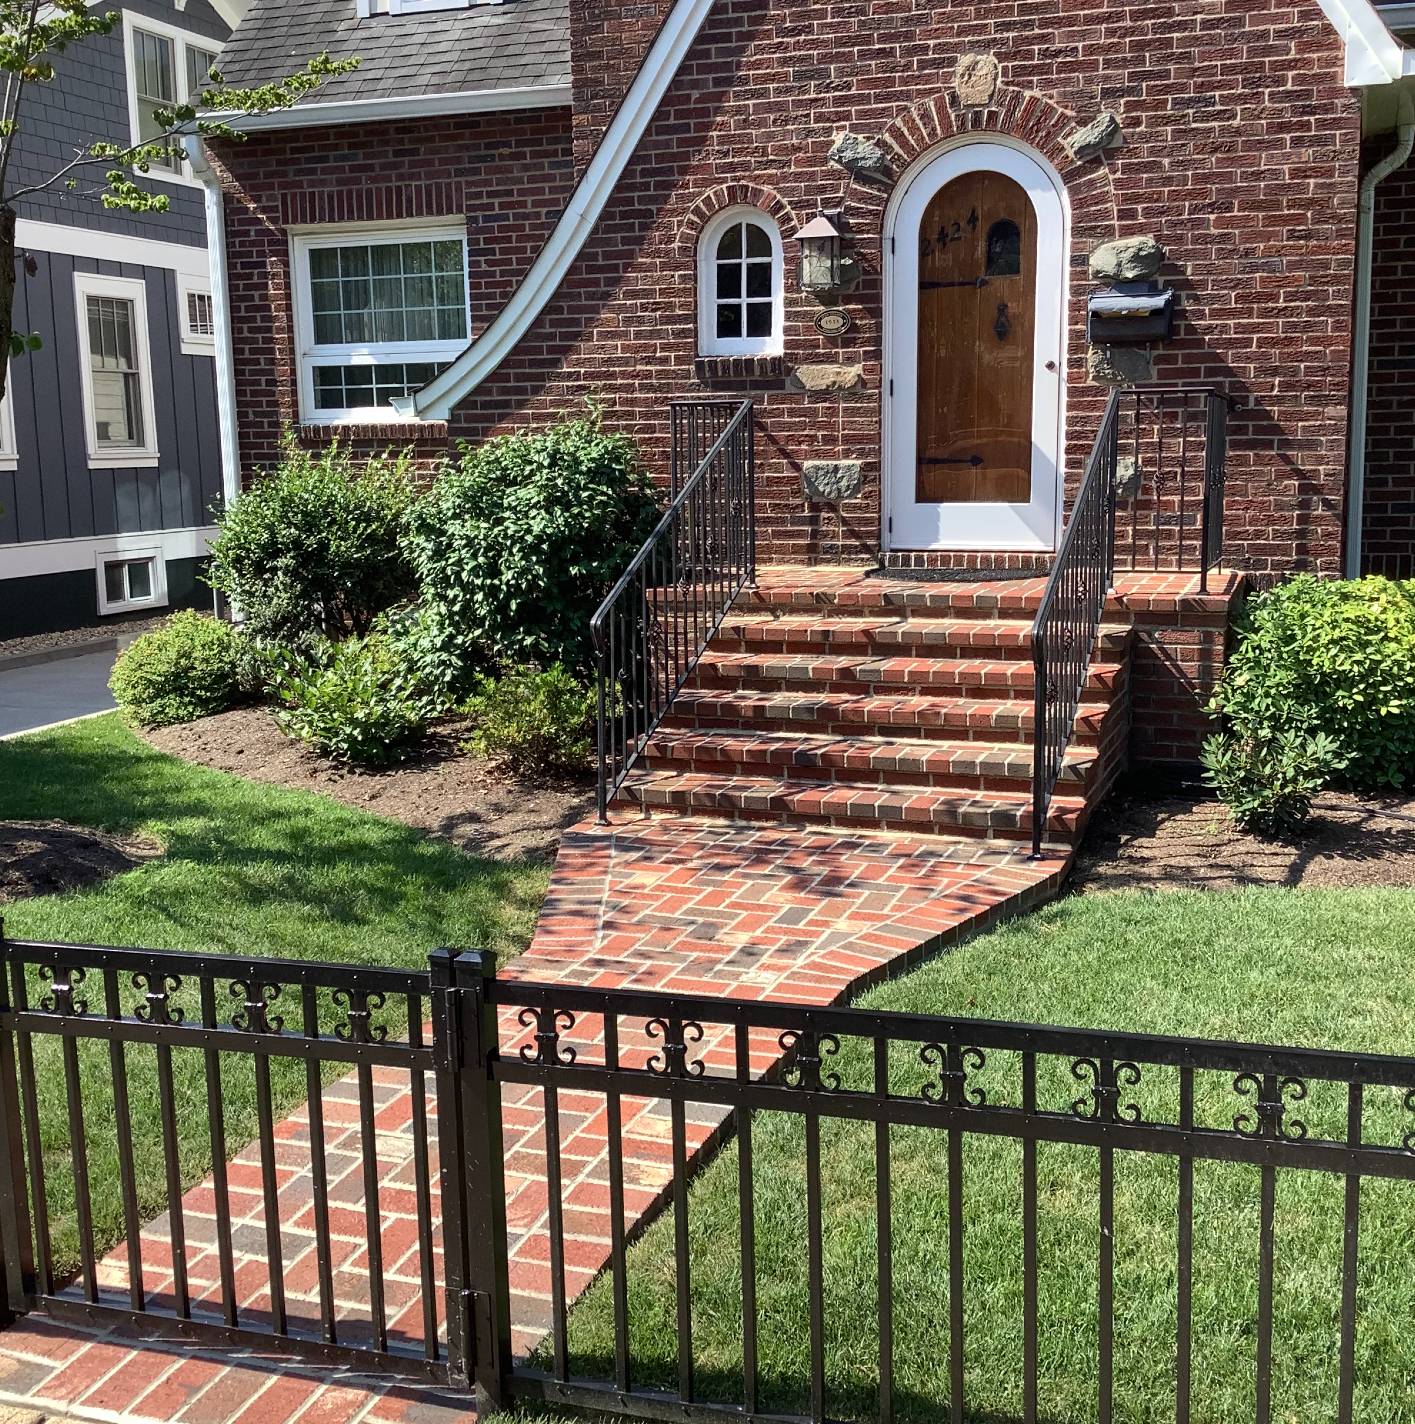 Image of Brick Pathway with Garden Fence and Brick Steps